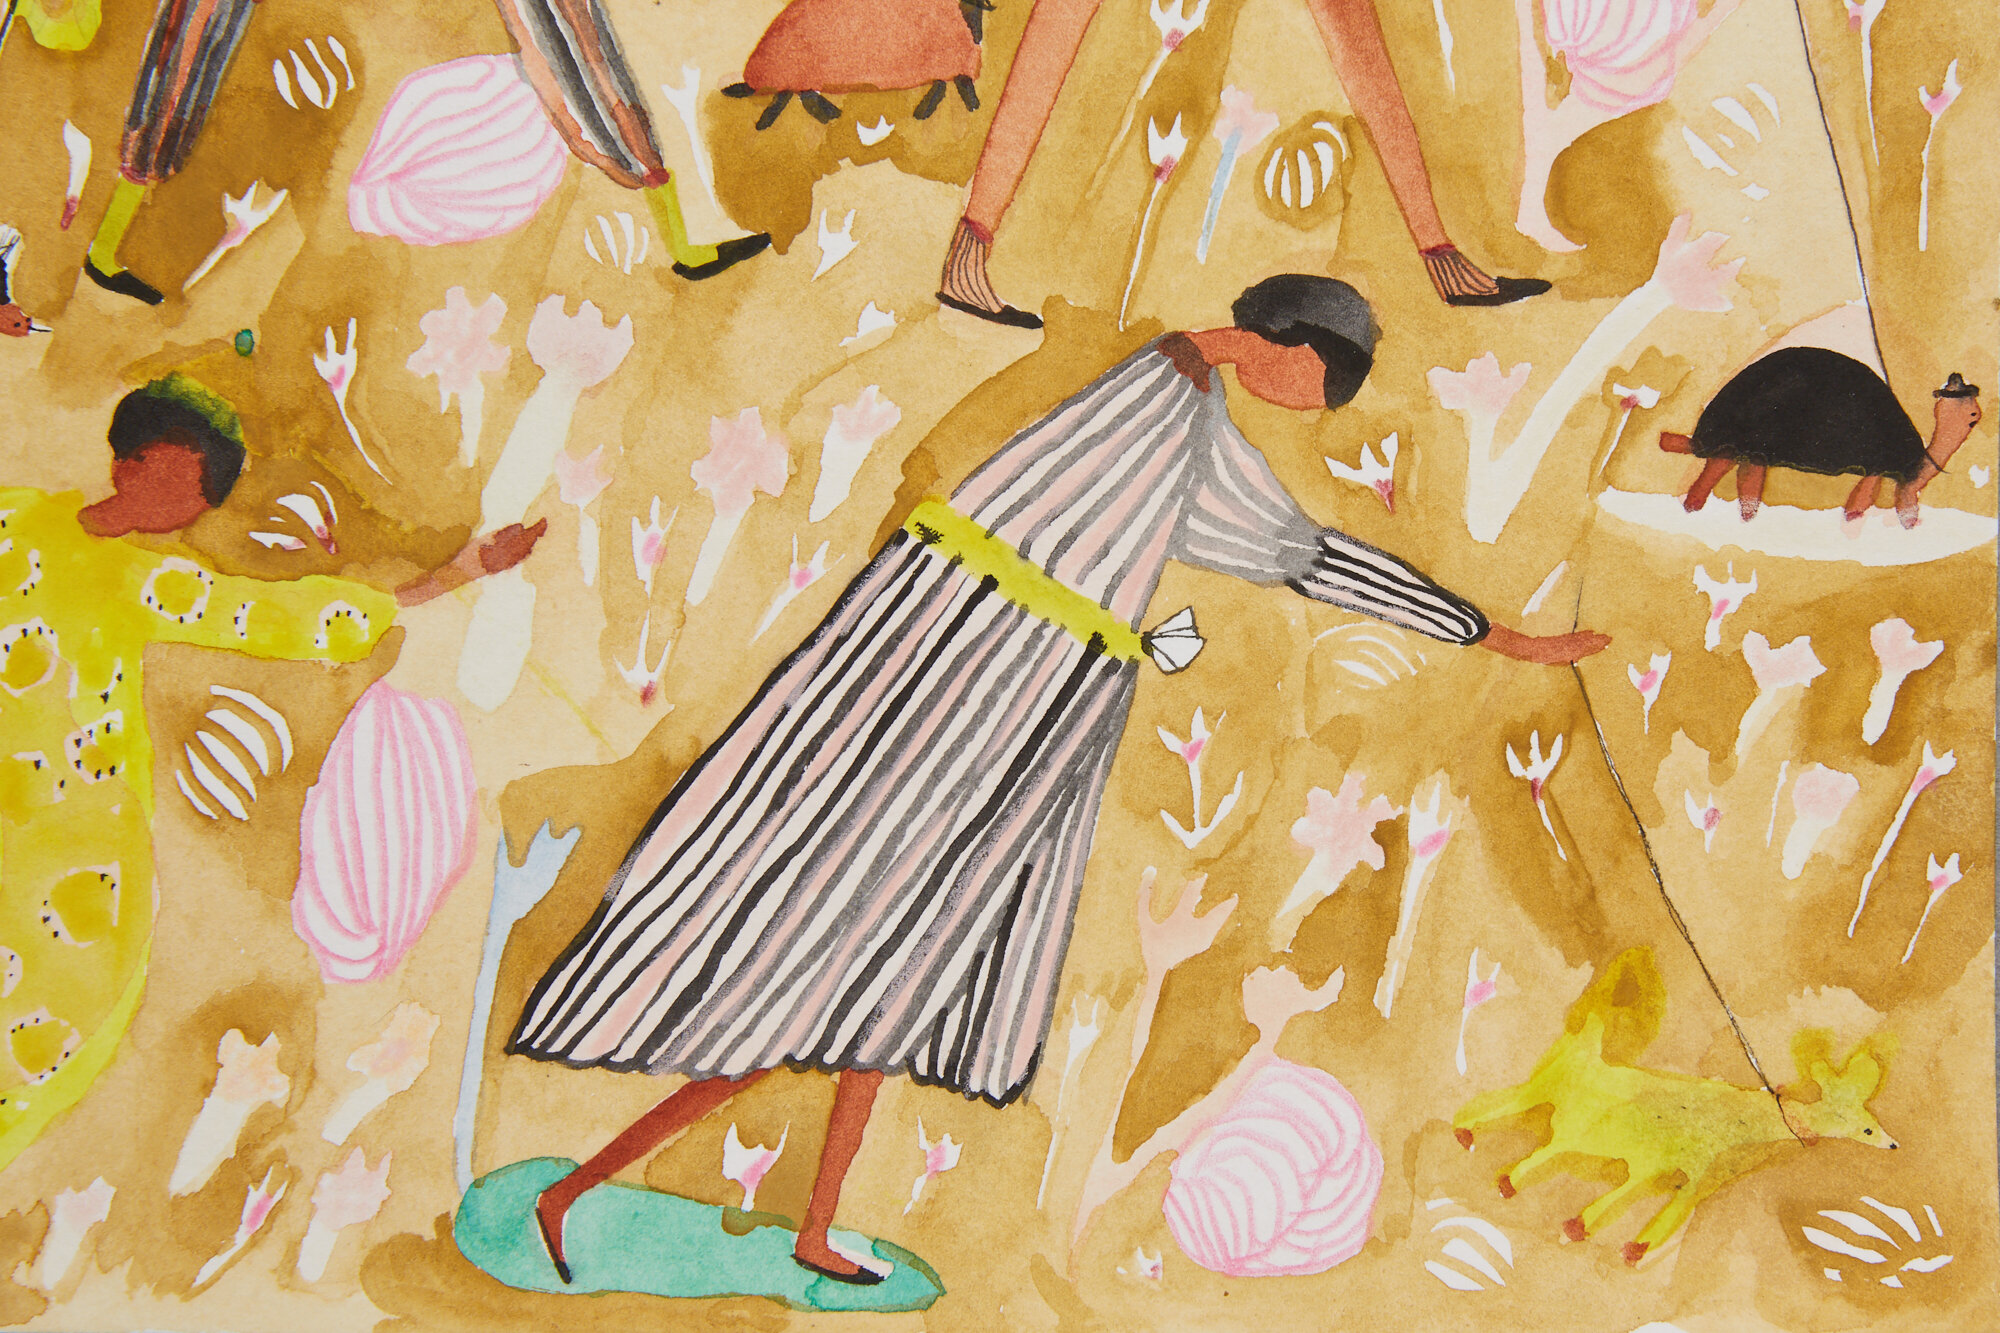   Tiny toes lead the way for sandy strolls, detail   Watercolor on paper, 2020  12” x 16”  Sold 